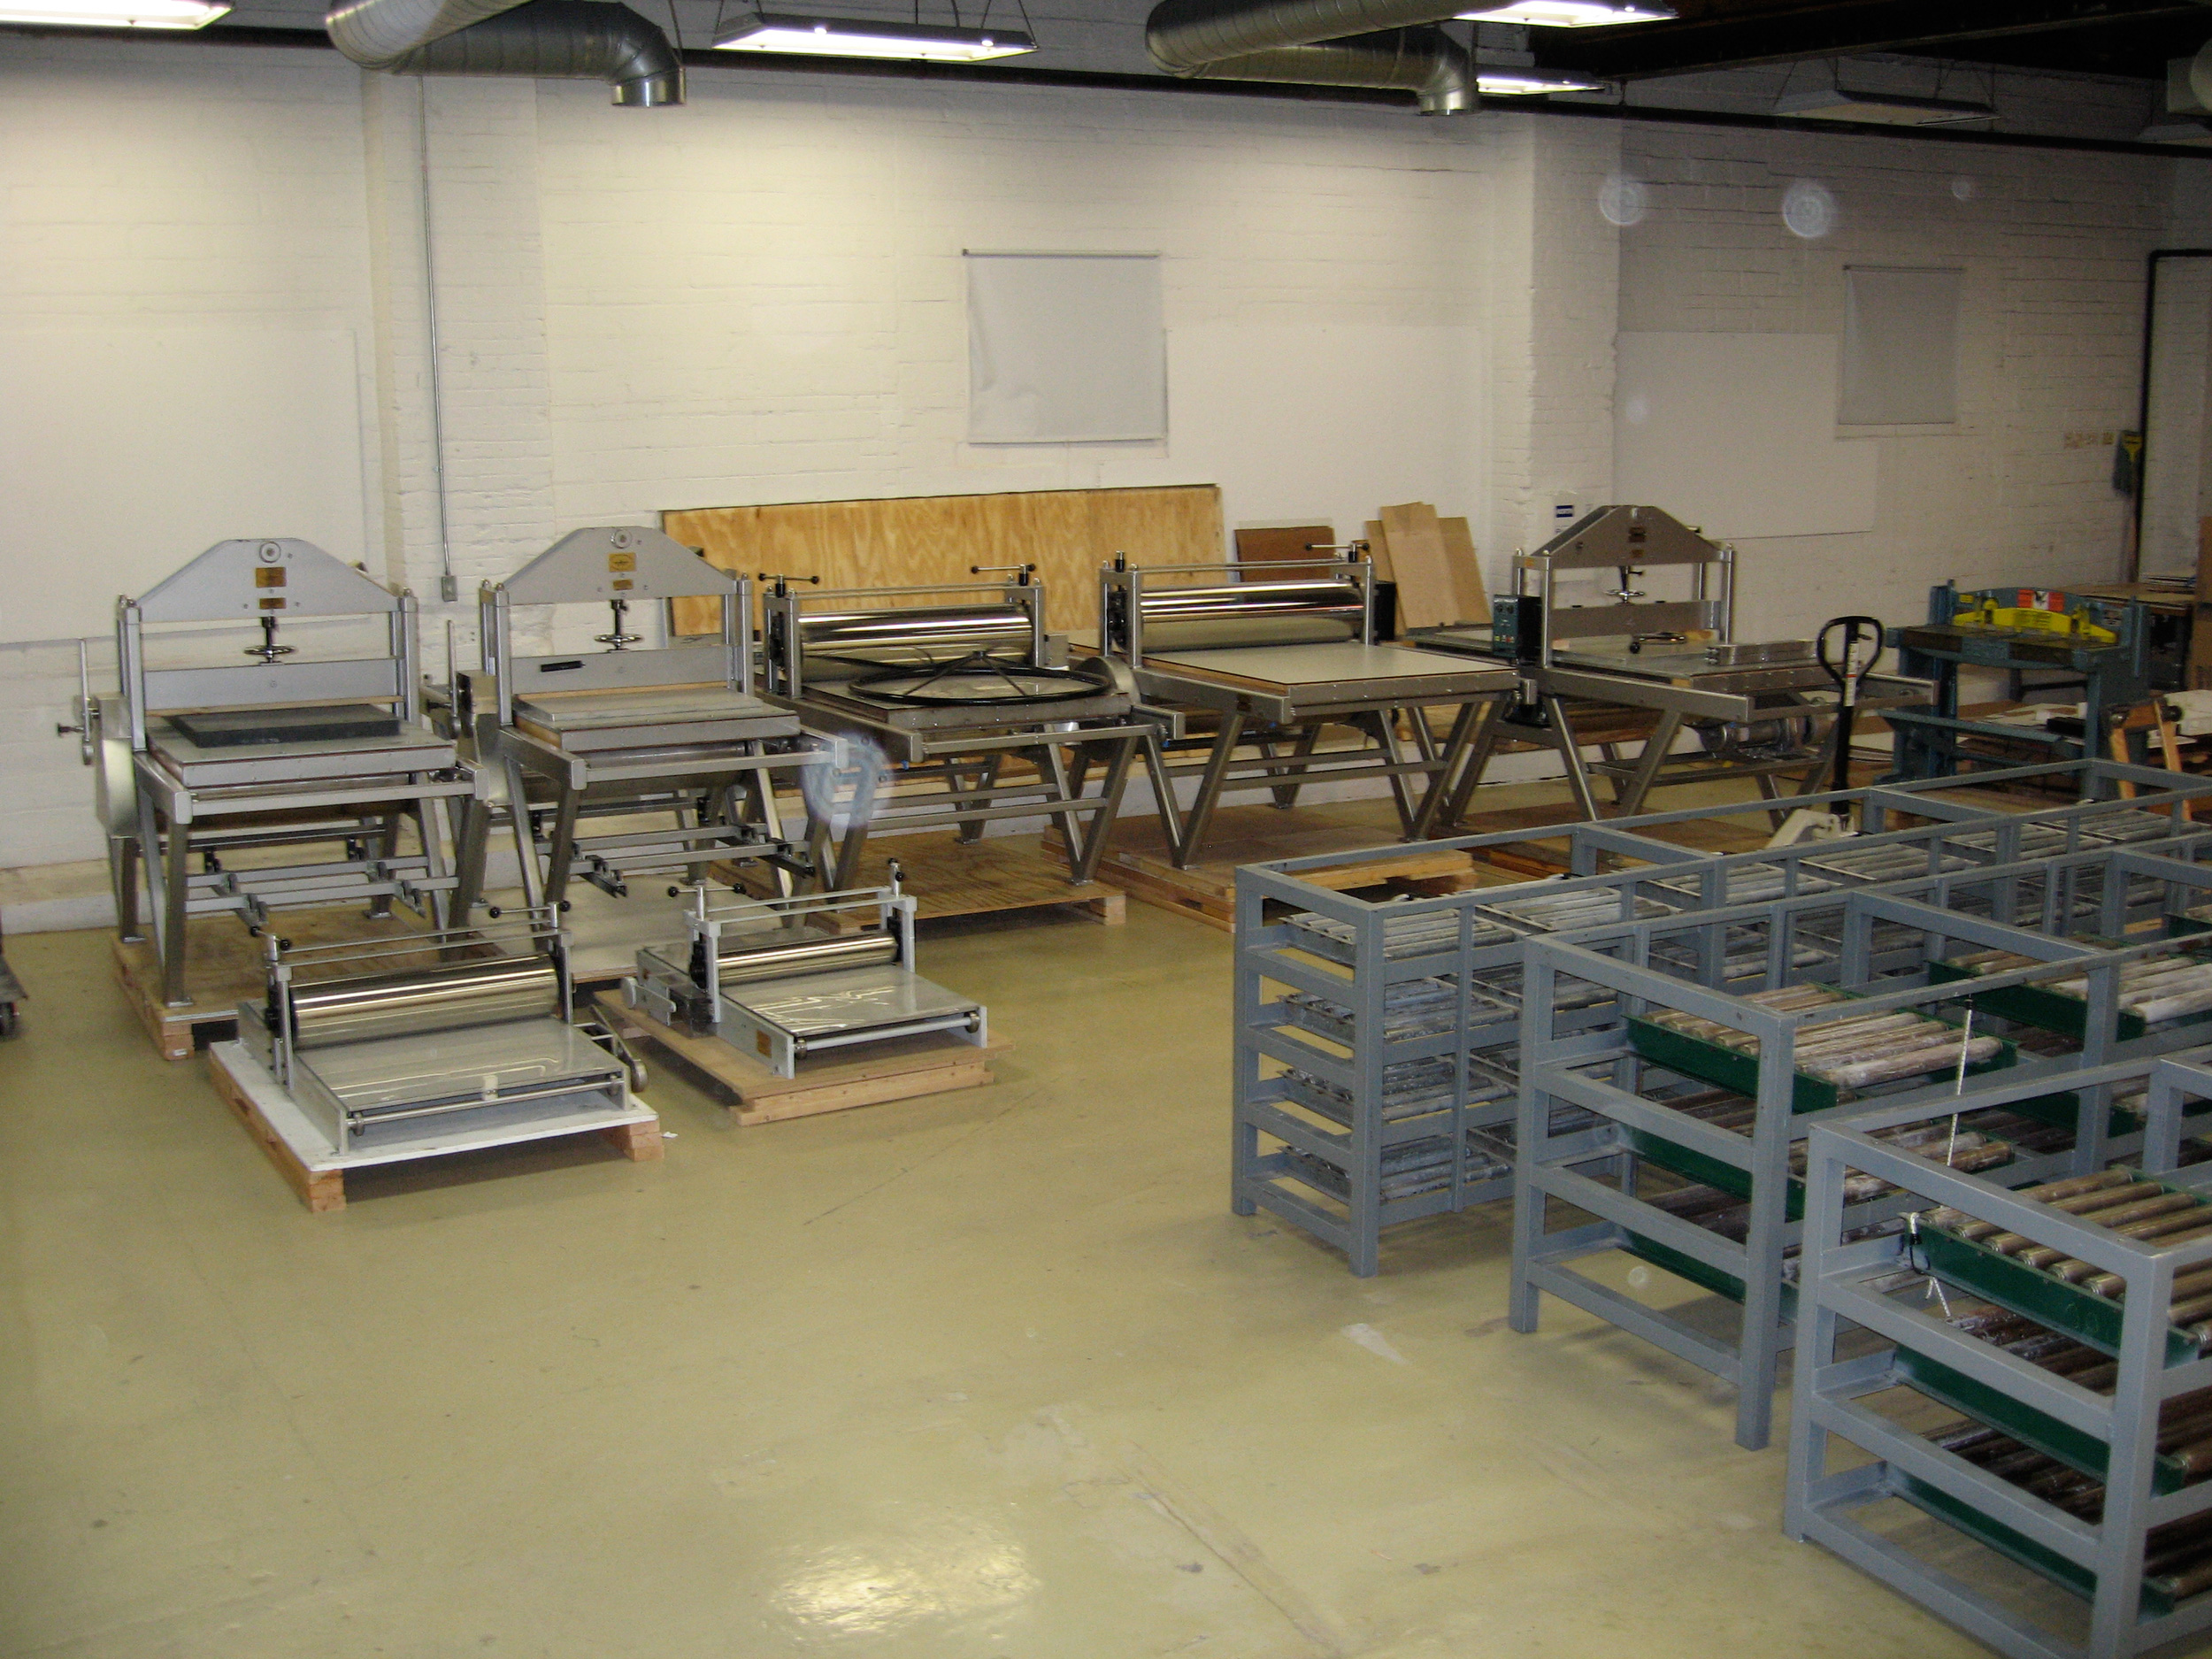 Presses awaiting placement in Co-op and Pro-Shop